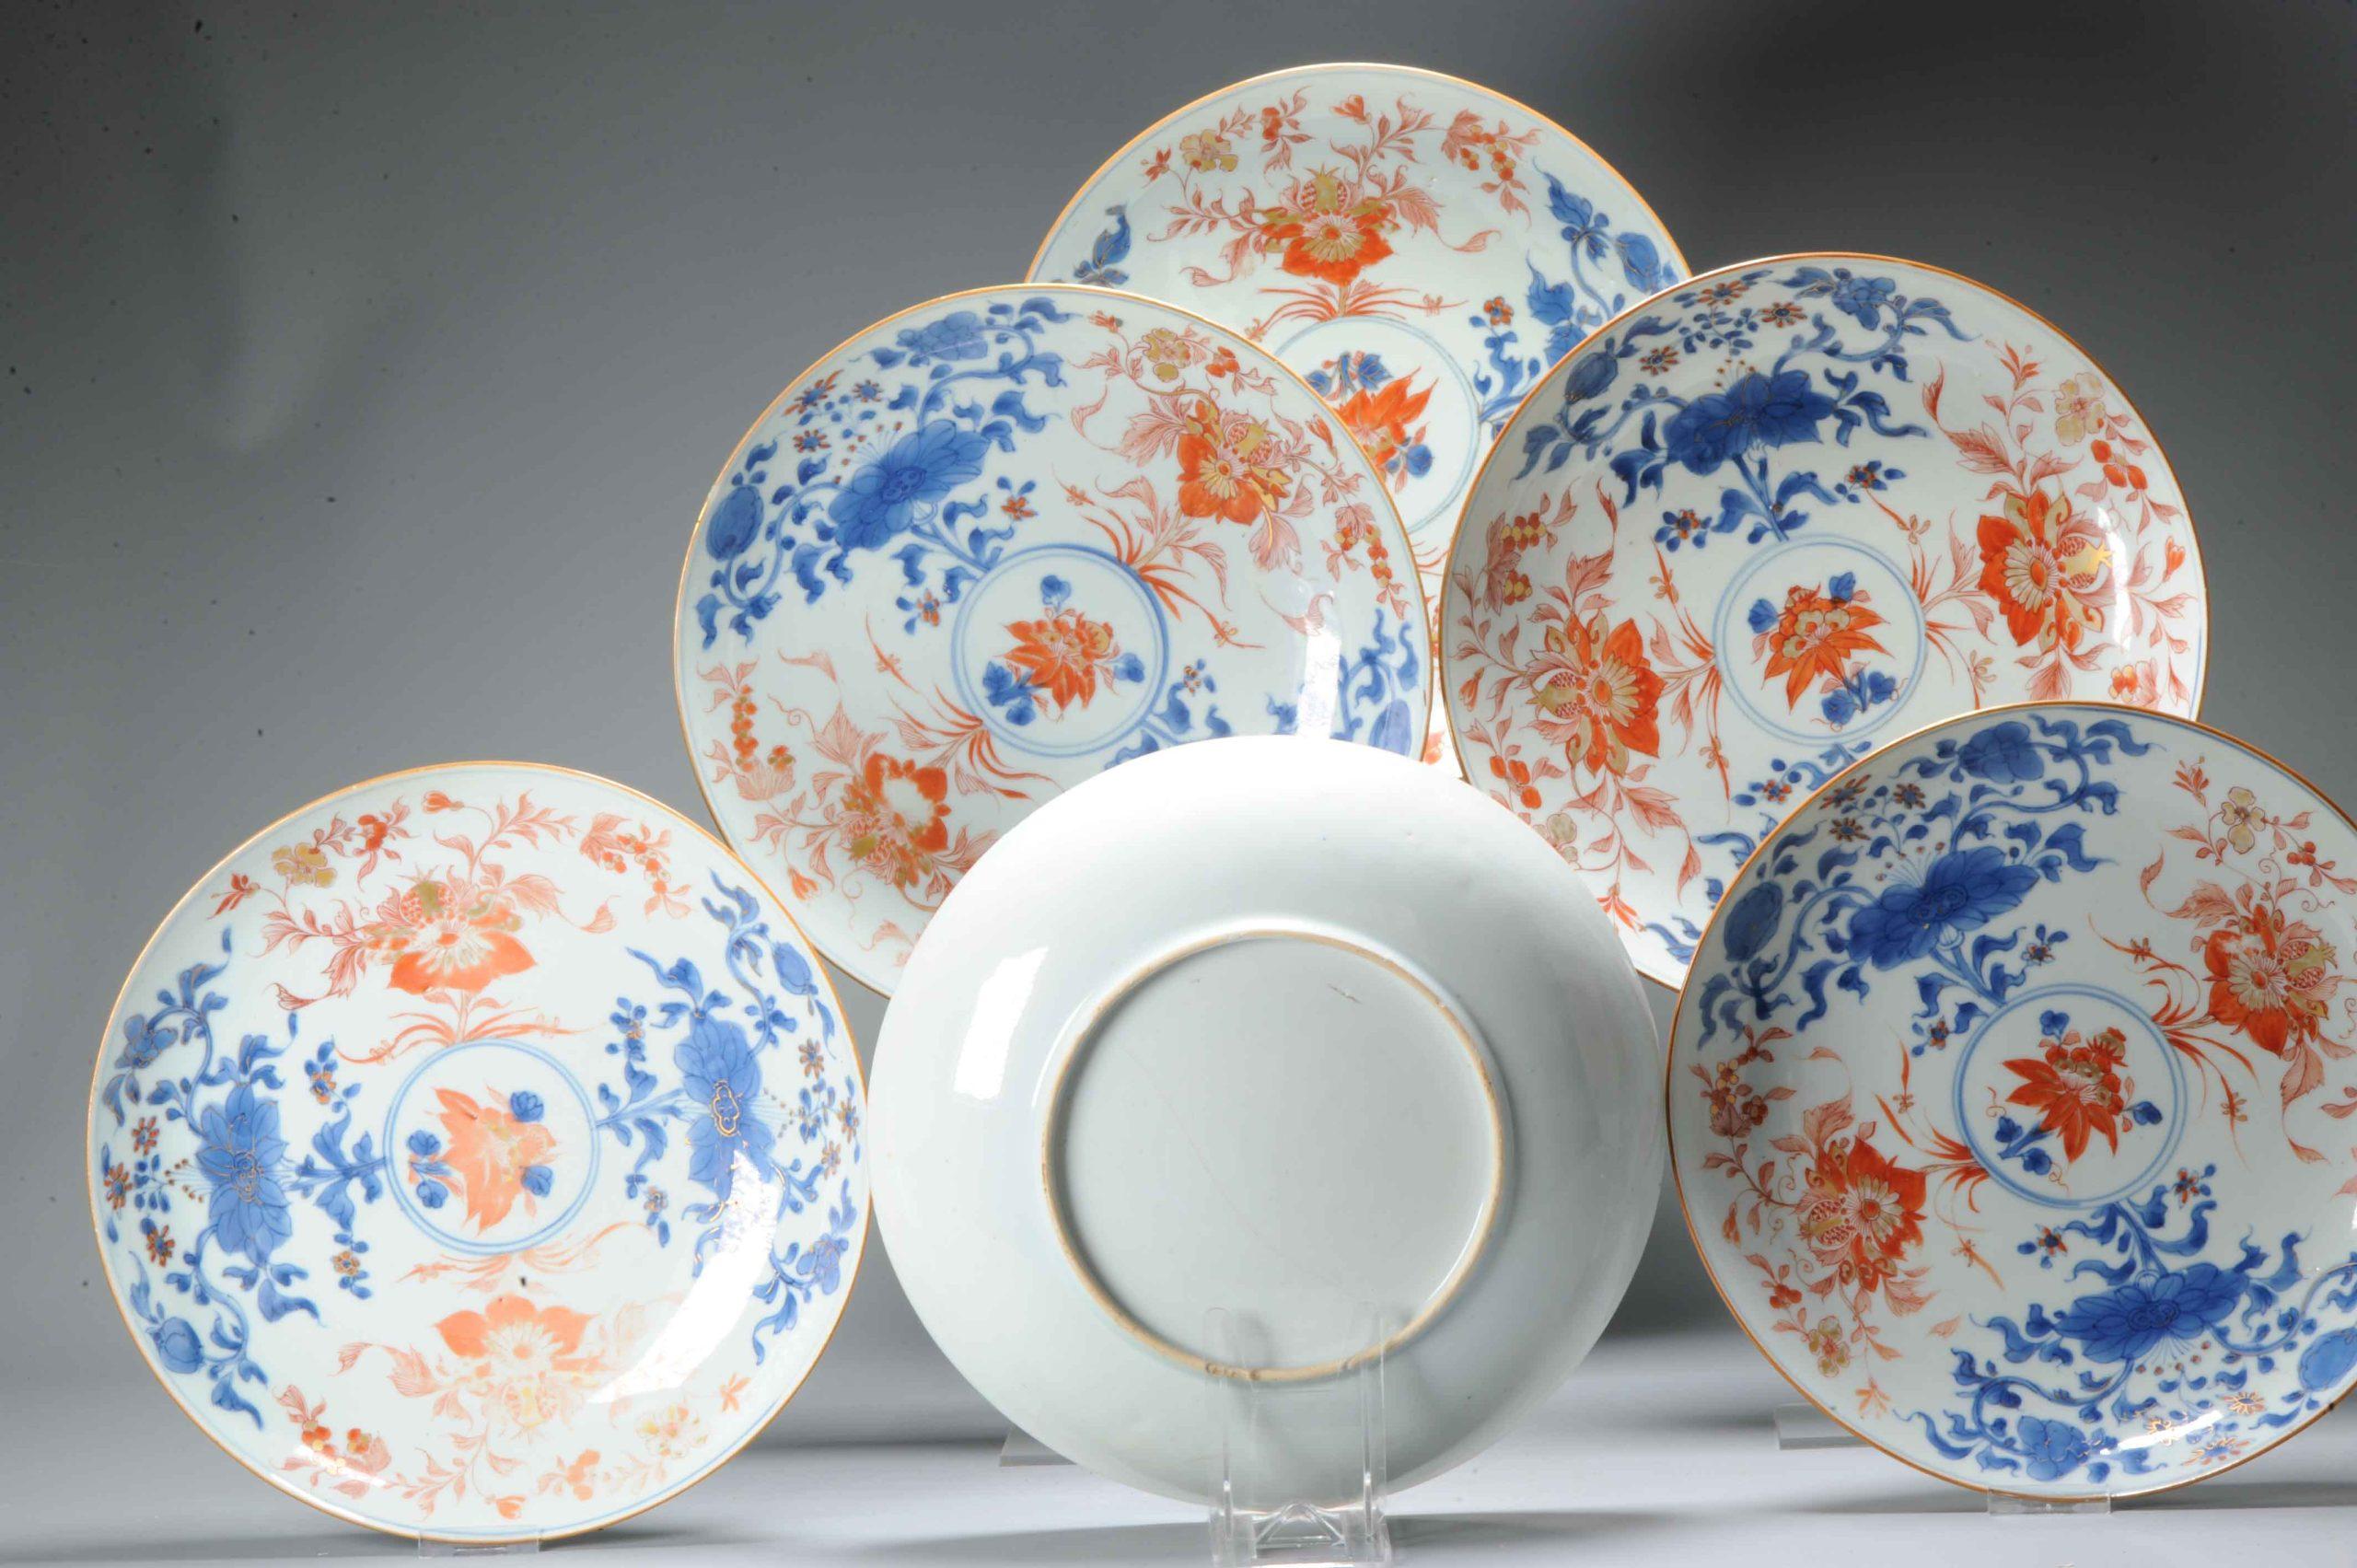 Large Size and Lovely and high Quality Kangxi dinner set in Imari palette. The plates all depict a Floral design in the border and part of central plate.

Additional information:
Material: Porcelain & Pottery
Region of Origin: China
Emperor: Kangxi